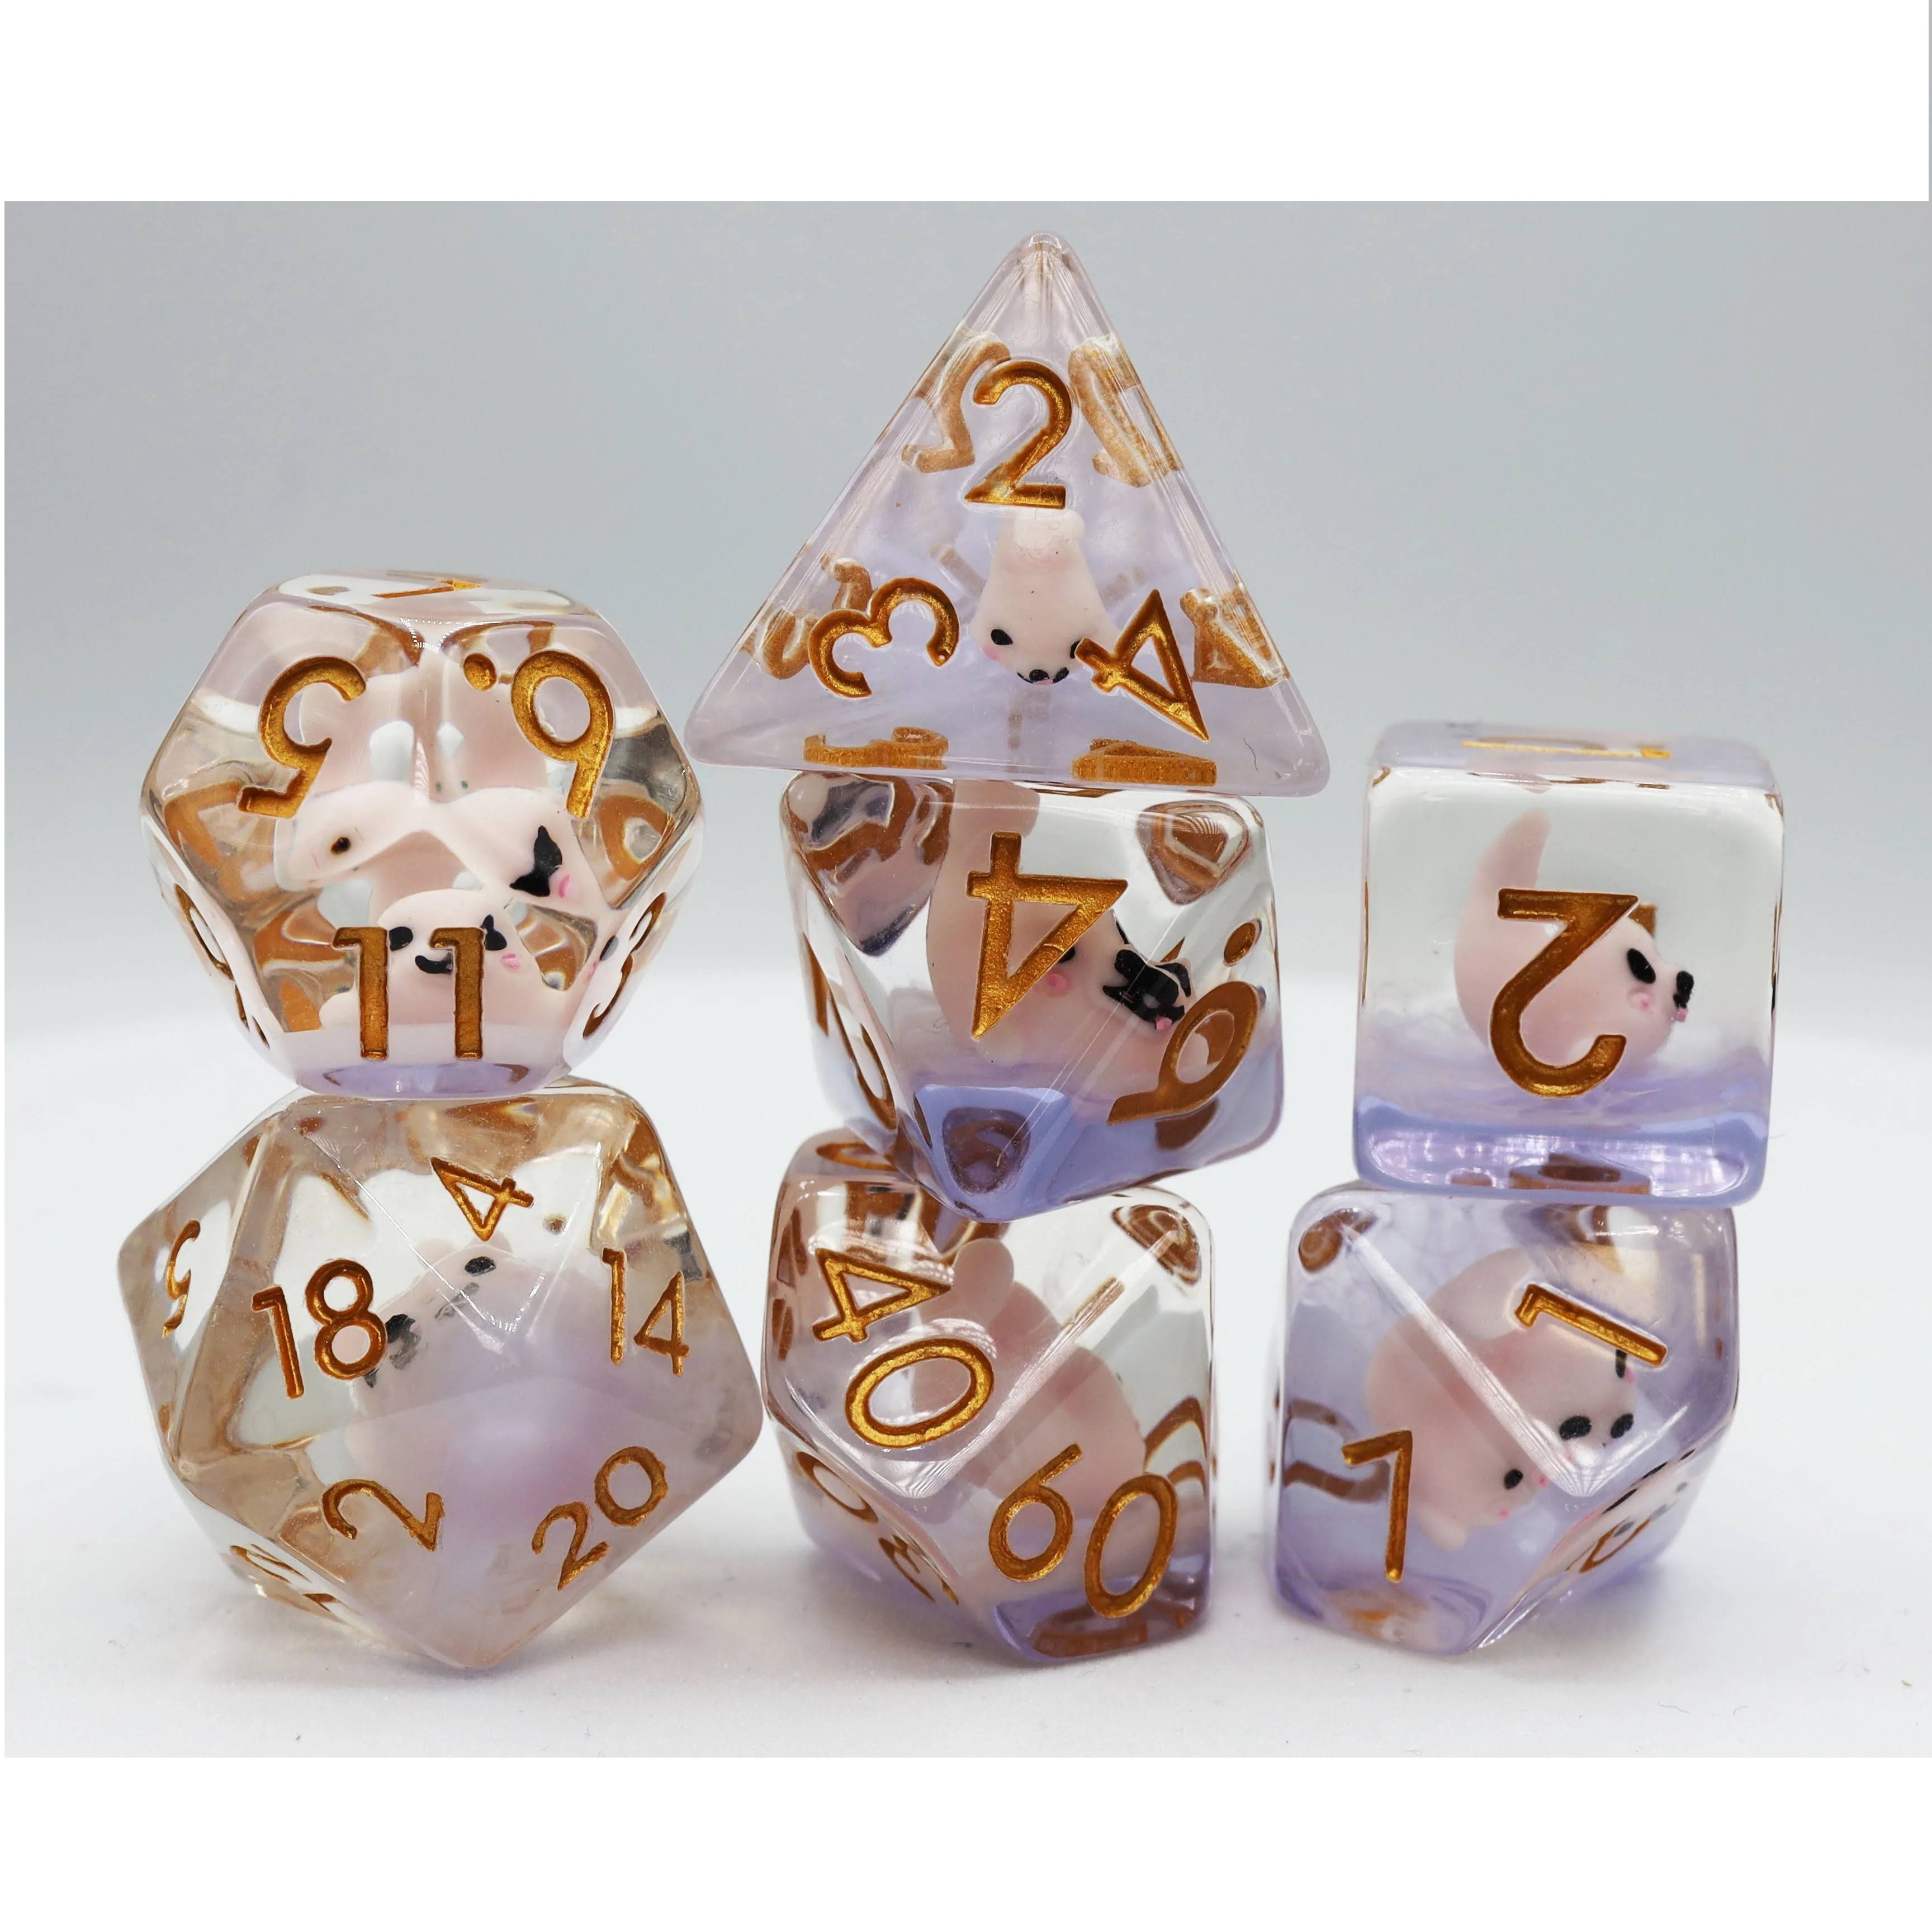 Dice and Gaming Accessories Polyhedral RPG Sets Stuff-Inside Pink Seal (7)